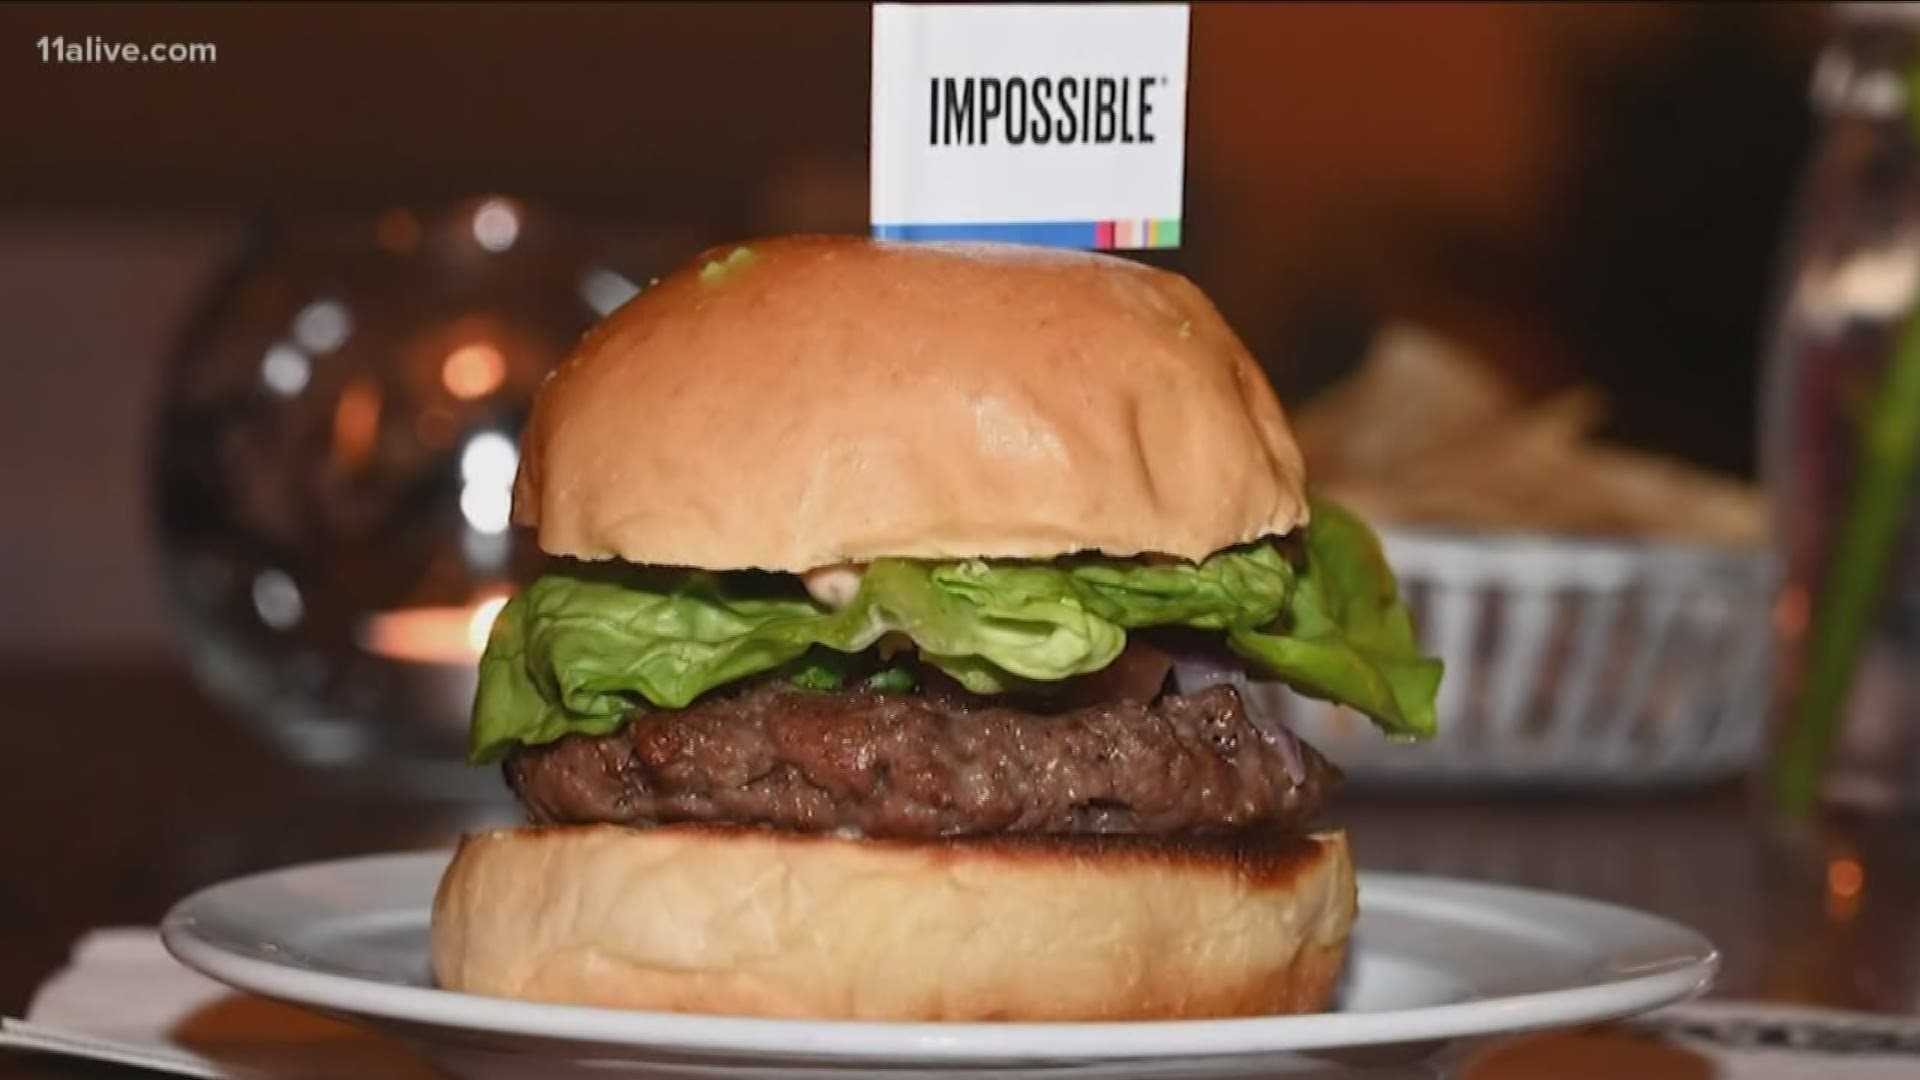 “We apologize for the inconvenience and understand we have some big Impossible Burger fans. Stay tuned and stay strong, the menu offering should be available on a regular basis very soon,” said Grindhouse Killer Burger Owner, Alex Brounstein